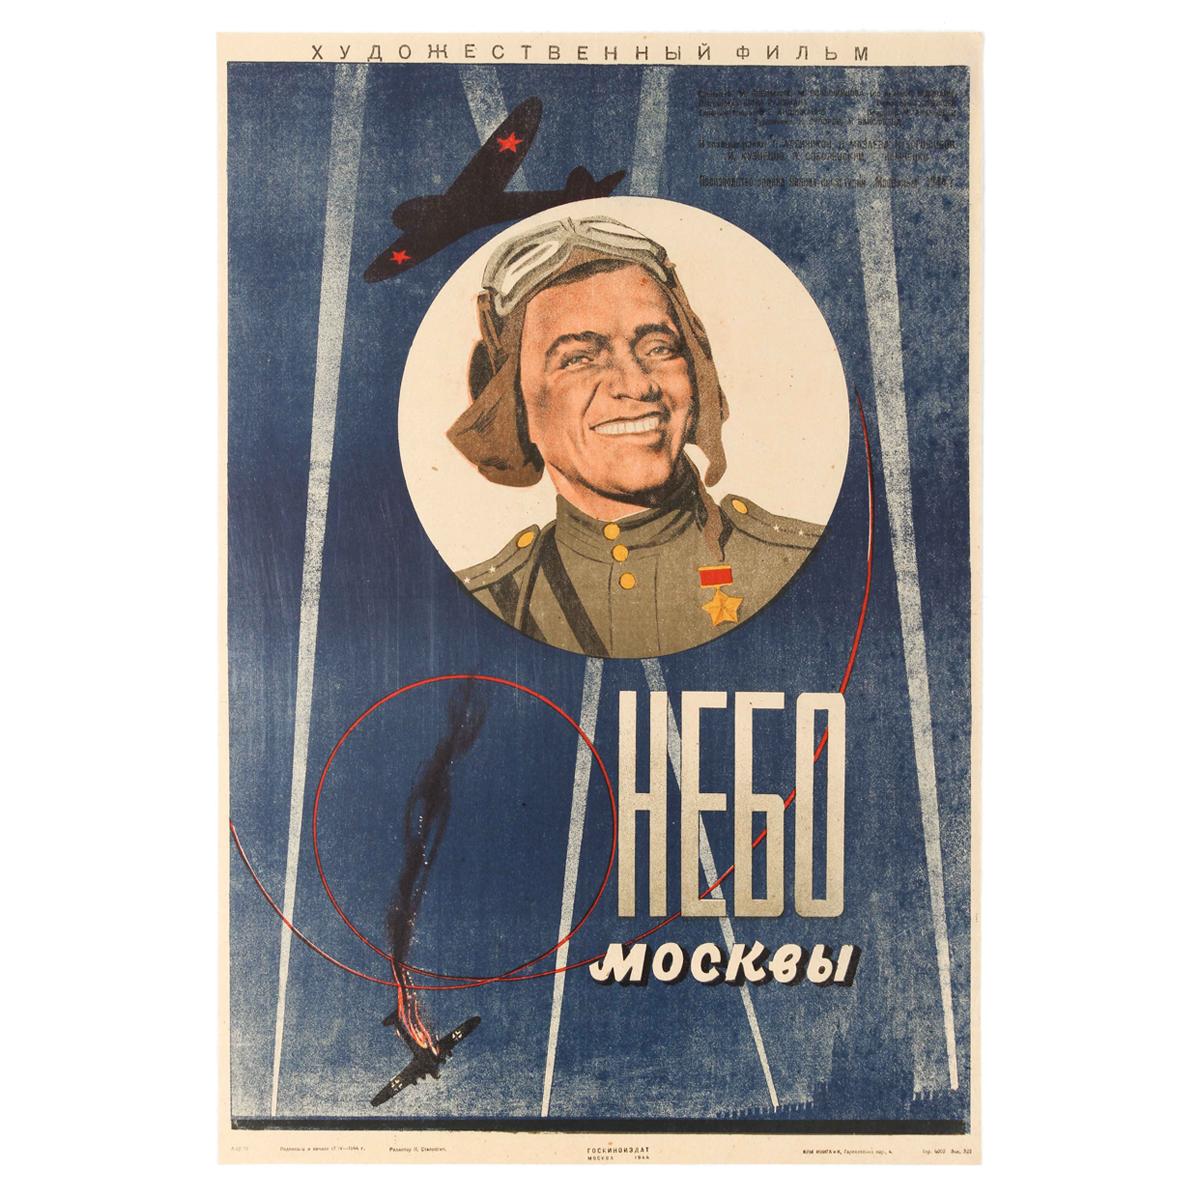 Original Vintage Poster Moscow Skies Soviet Fighter Pilot WWII Film Nebo Moskvy